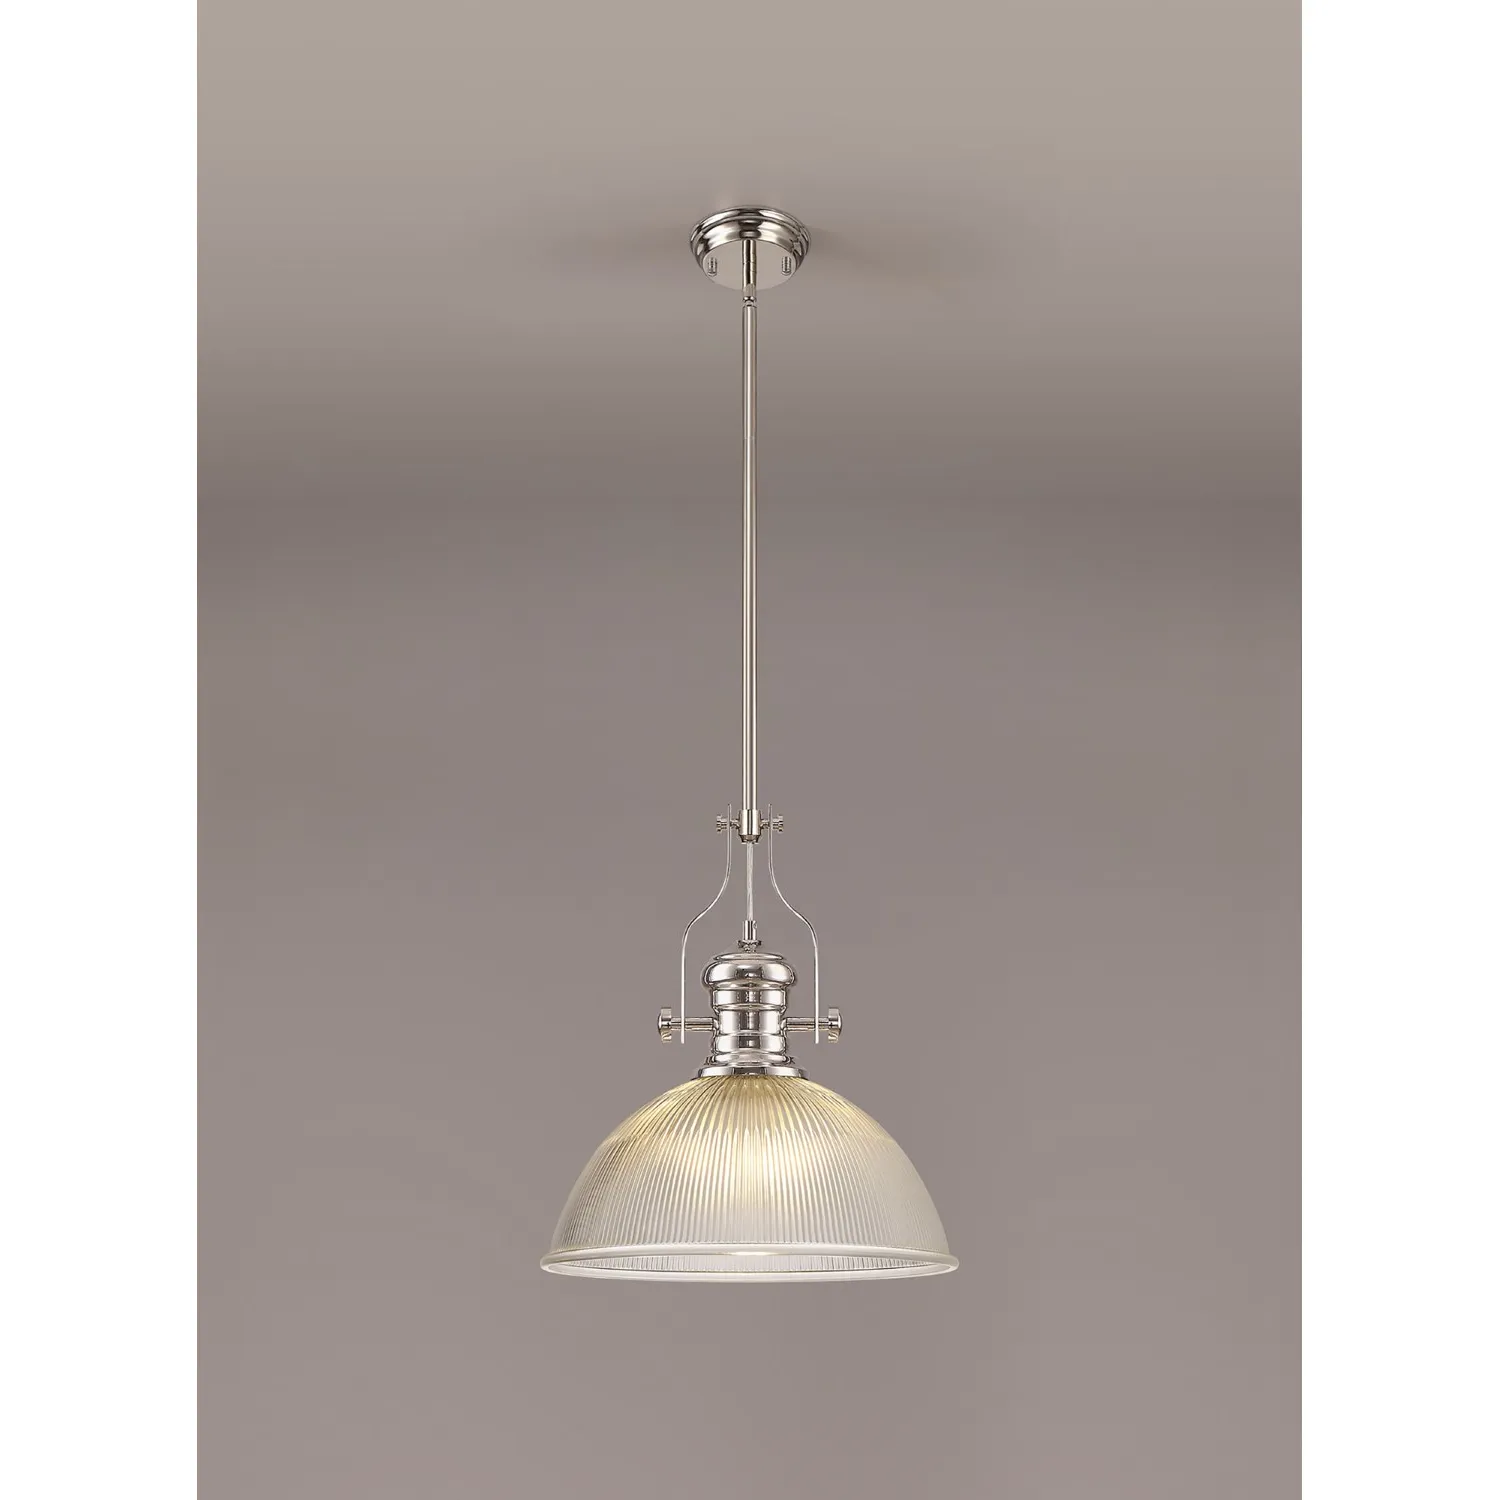 Sandy 1 Light Pendant E27 With 38cm Dome Glass Shade, Polished Nickel Clear